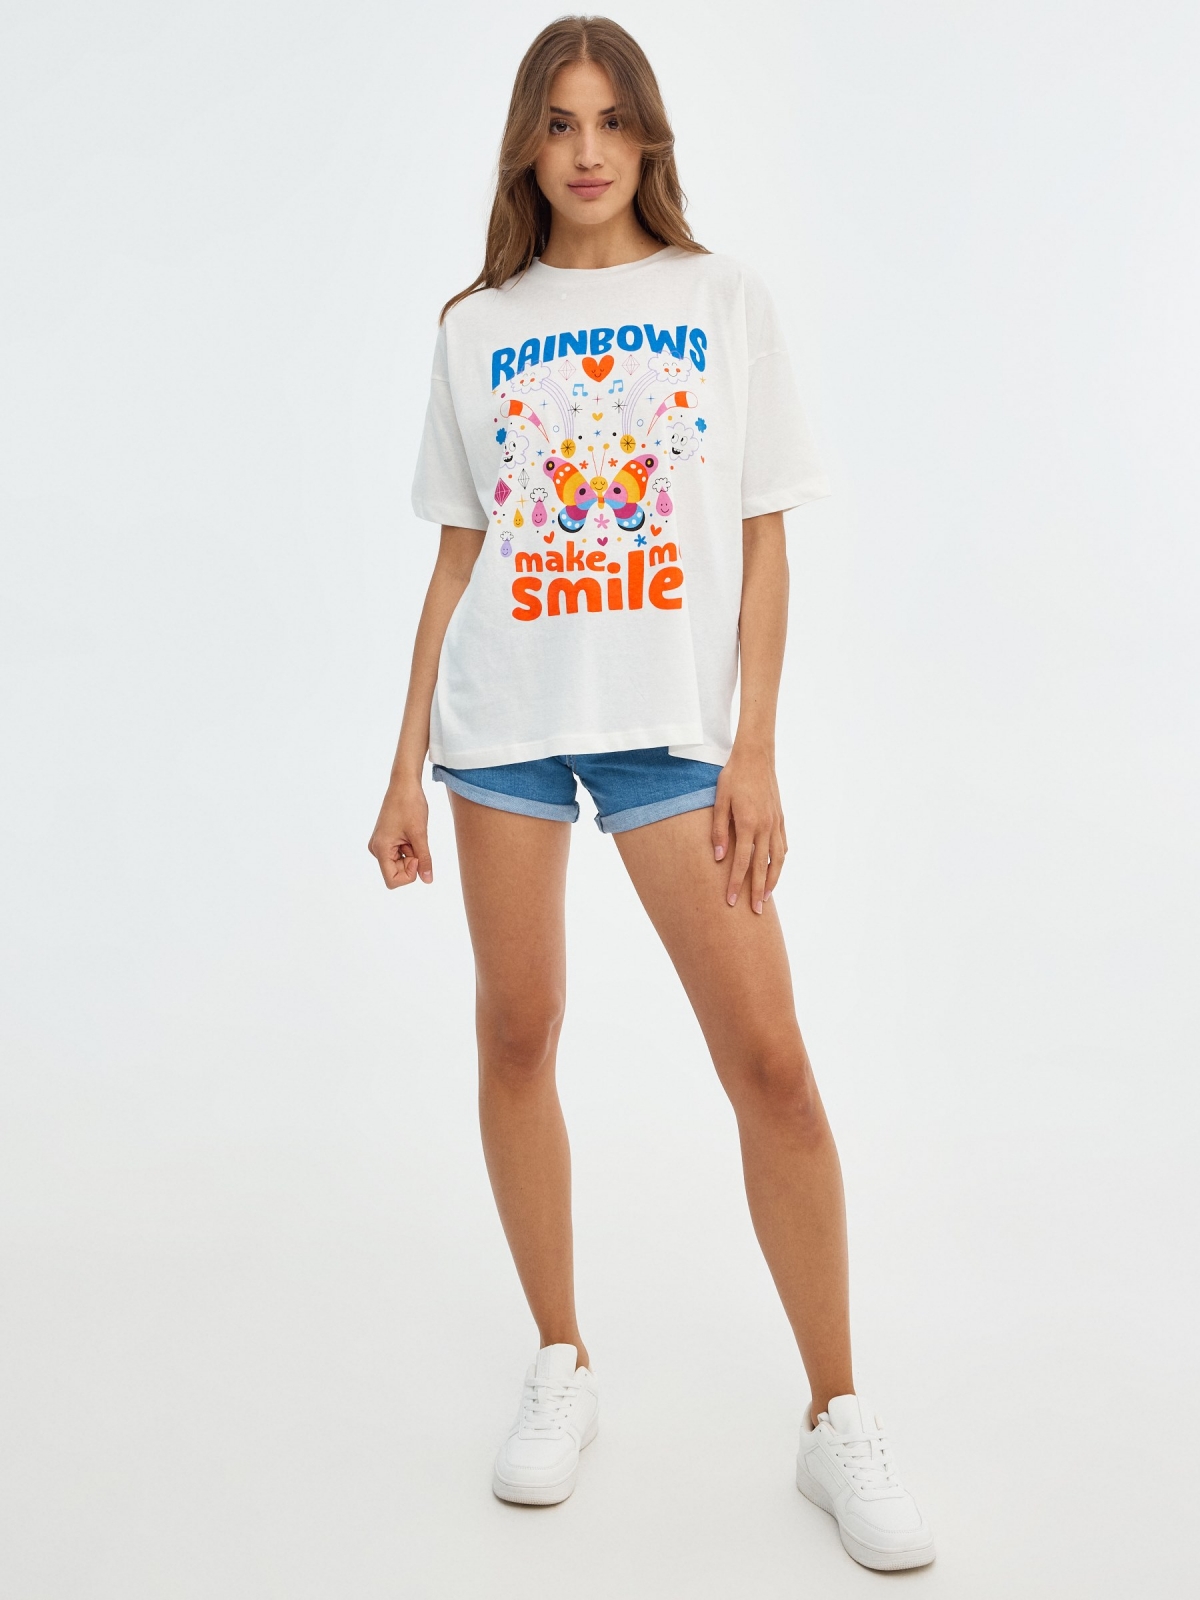 T-shirt oversized Rainbows off white vista geral frontal